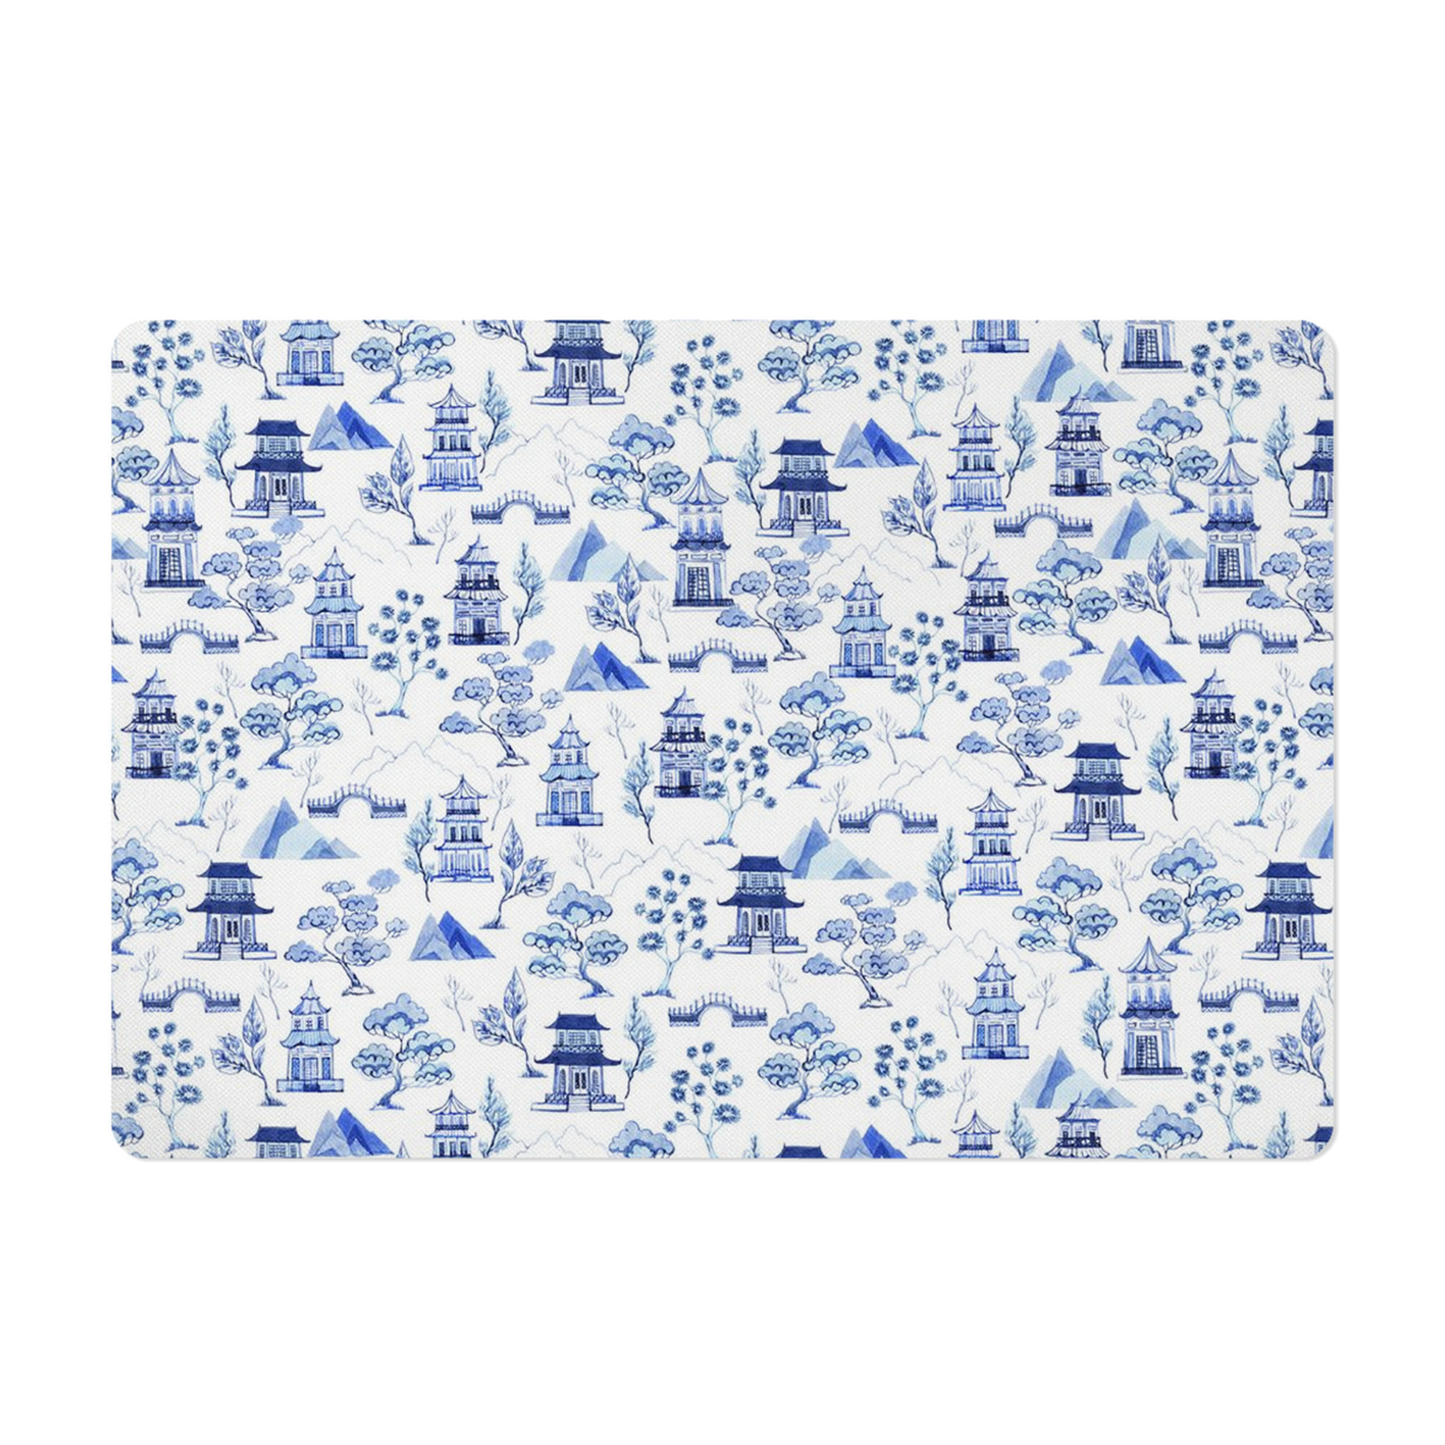 Pet Placemat, Chinoiserie, Toile, Blue and White, 12" x 18"